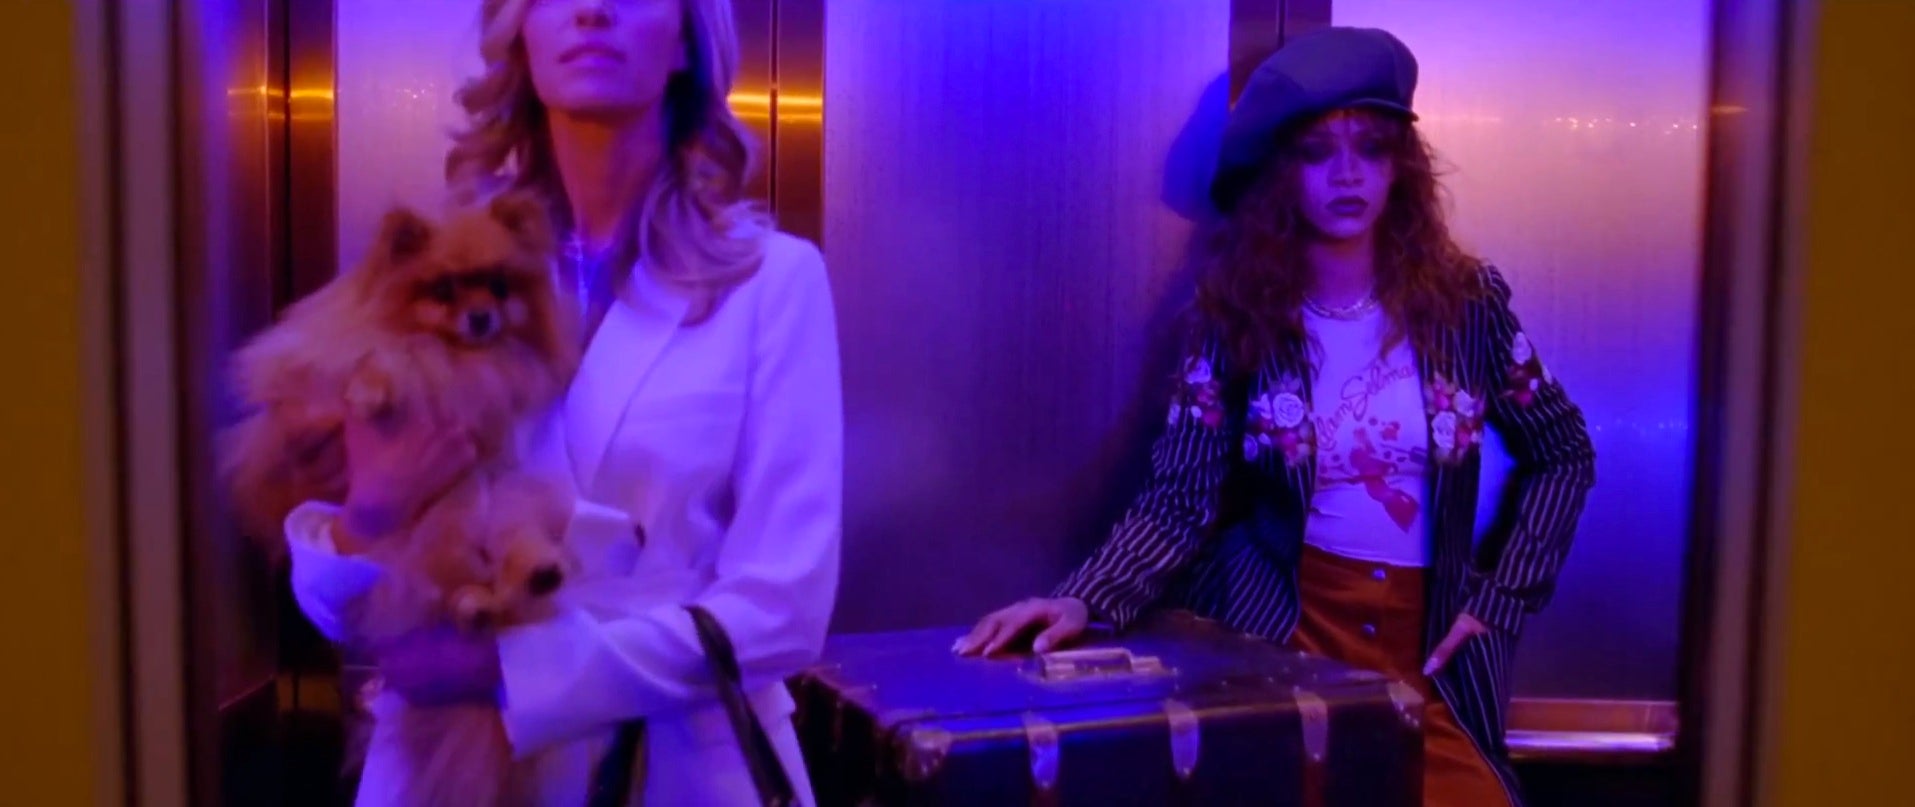 7 Reasons Why We're Ready for Rihanna's 'BBHMM" Video
